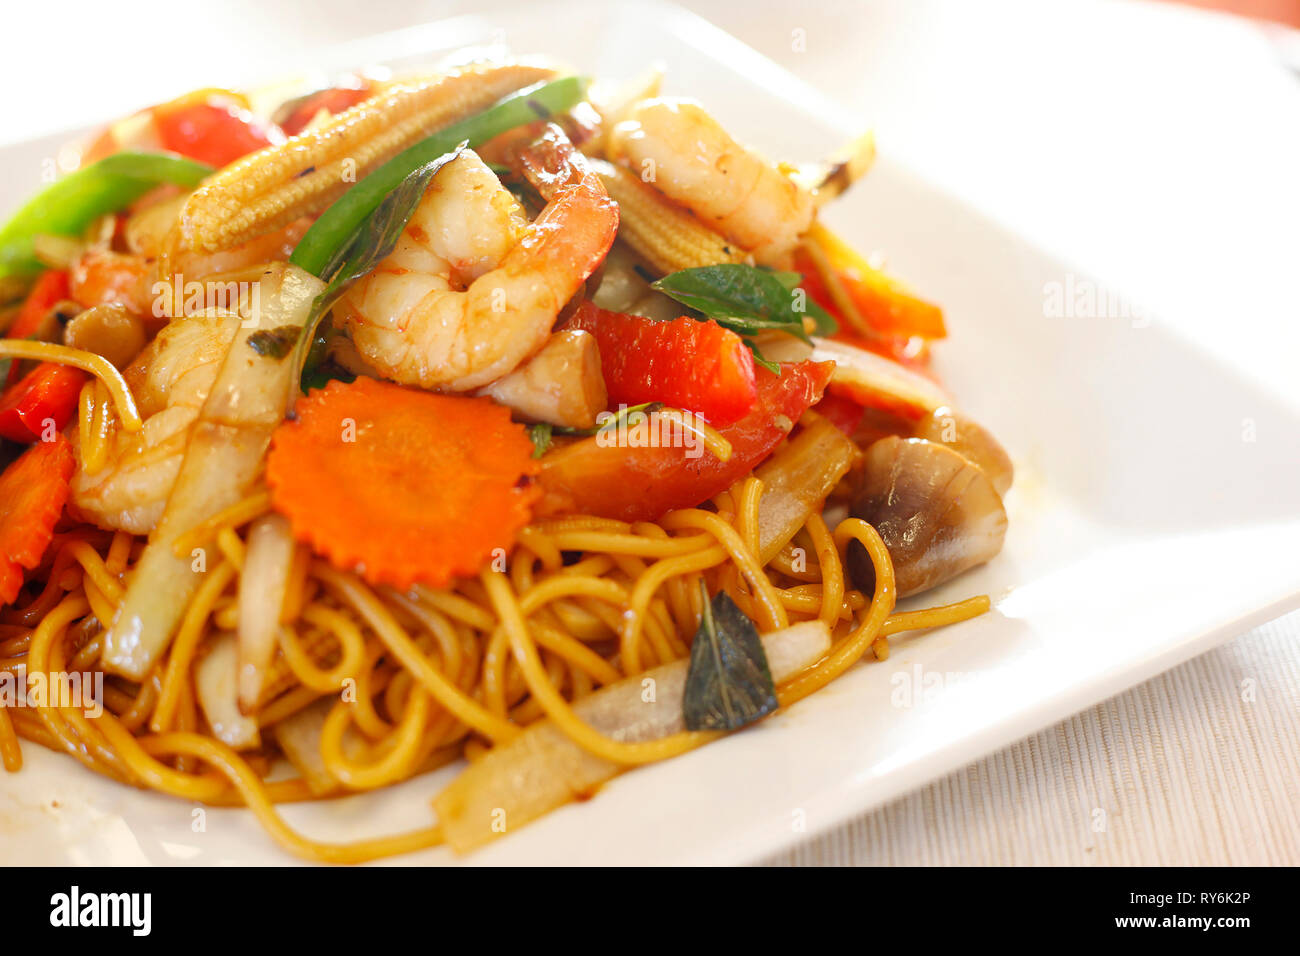 Close-up of noodles with vegetables and prawns served in plate on table Stock Photo